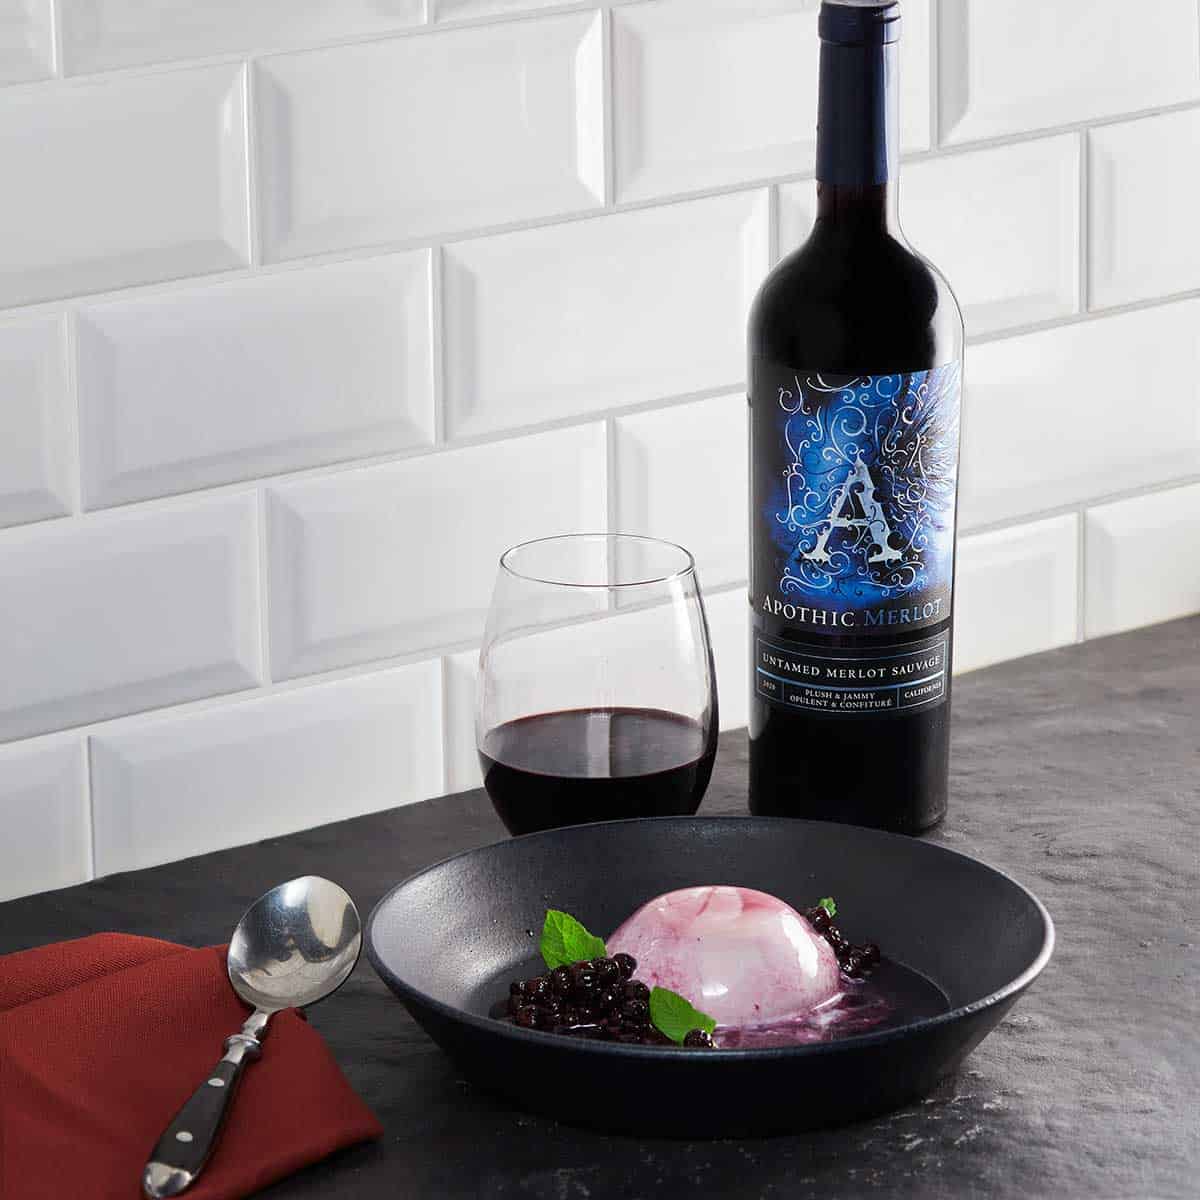 A panacotta bowl with berry wine sauce in front of a glass and a bottle of Apothic Merlot